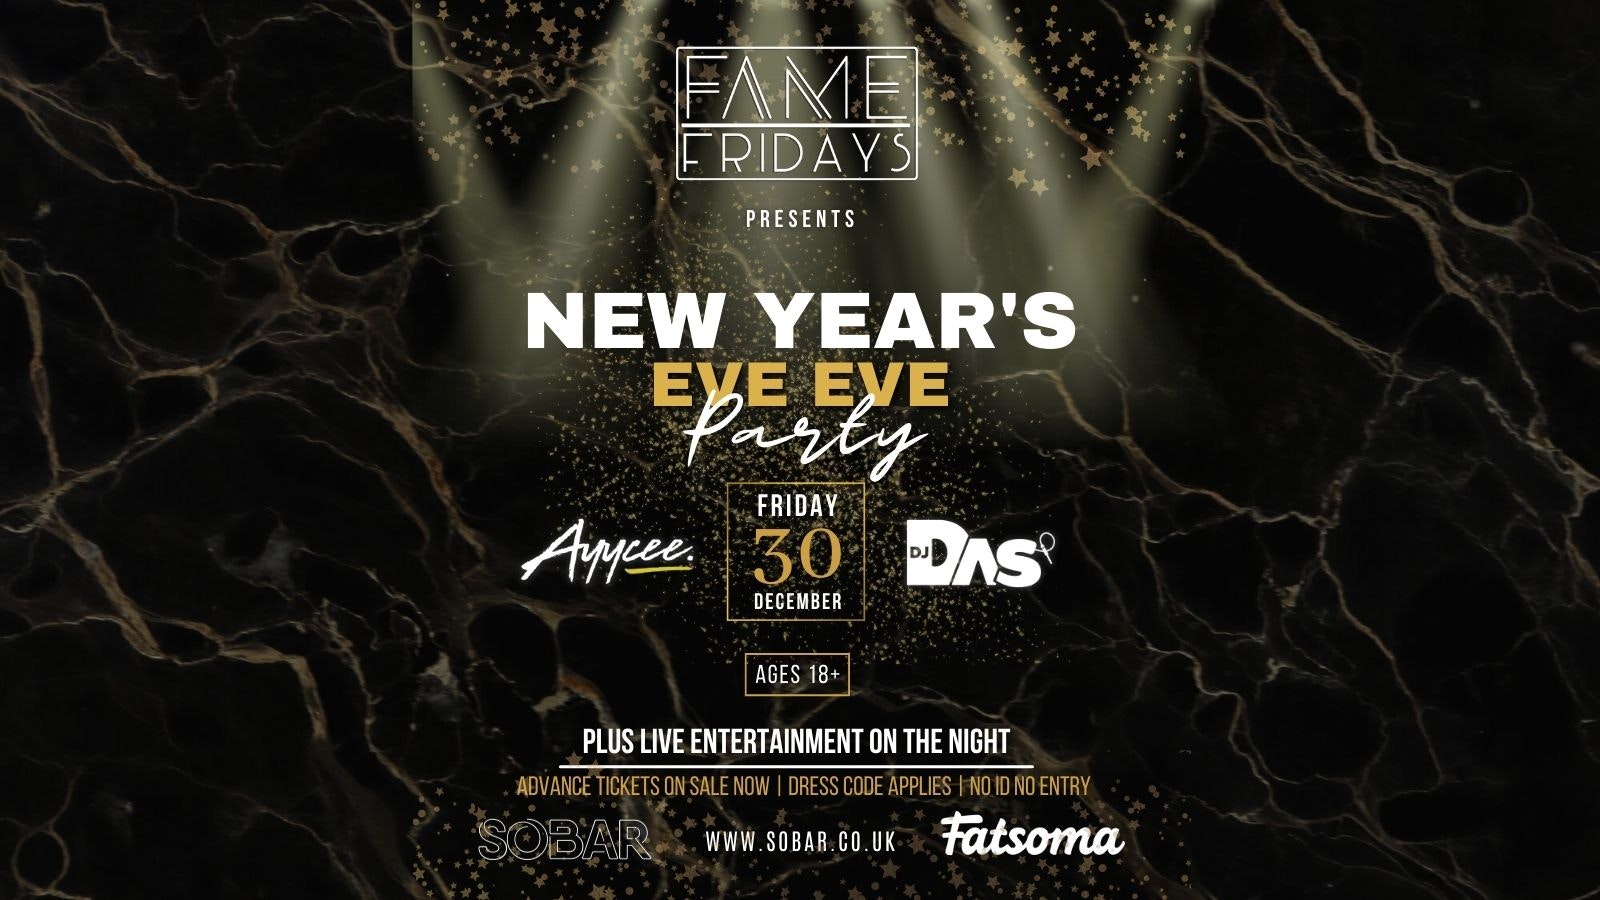 Fame Fridays Present “New Years Eve EVE”